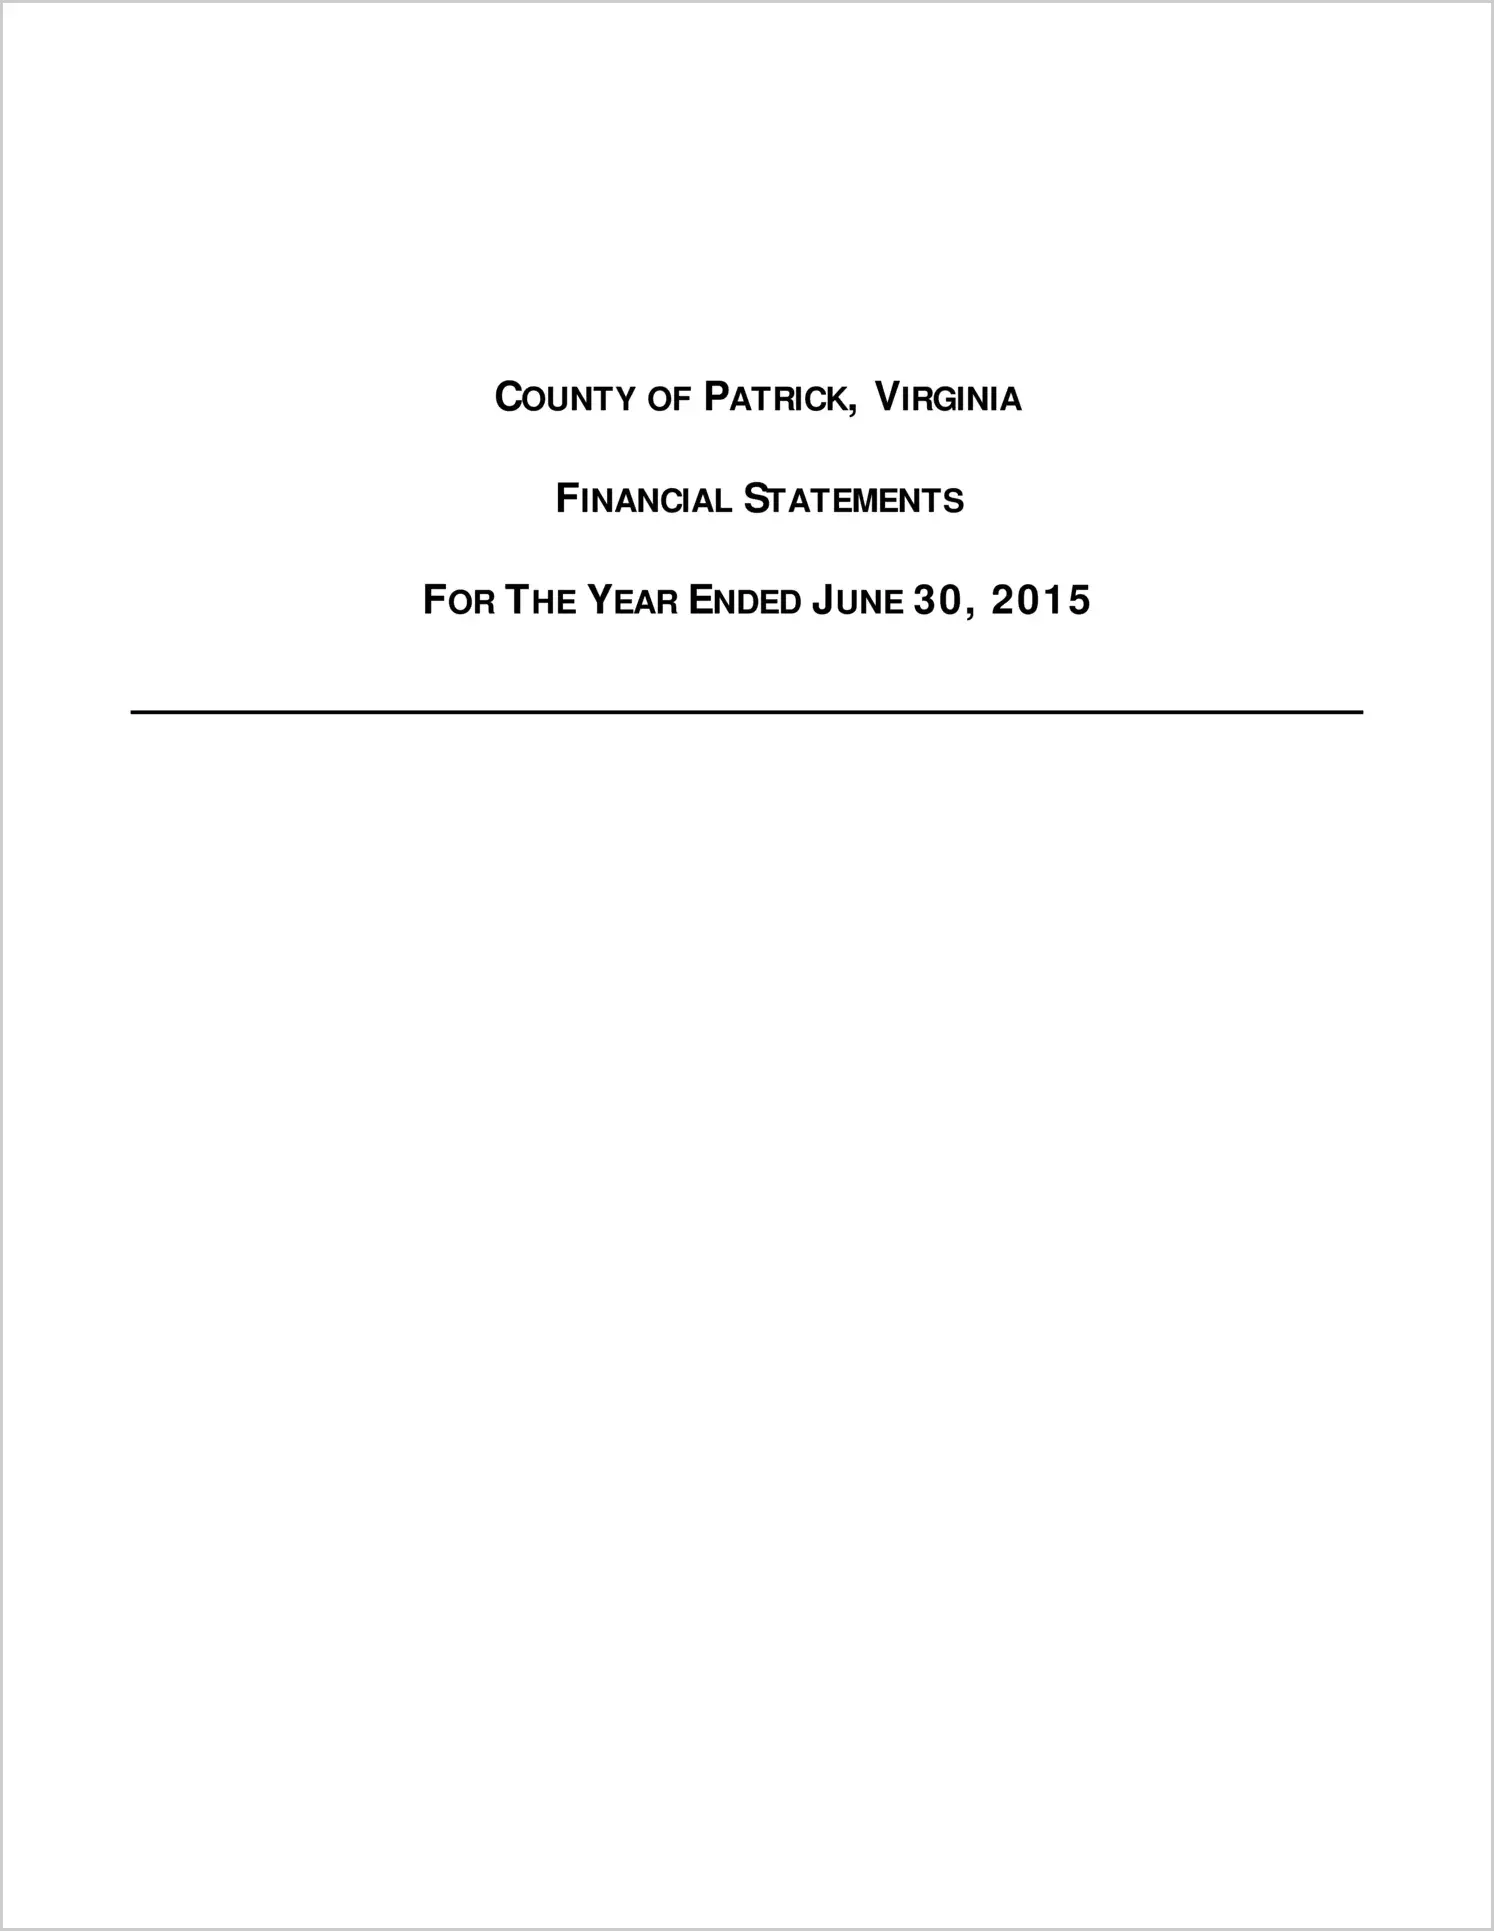 2015 Annual Financial Report for County of Patrick